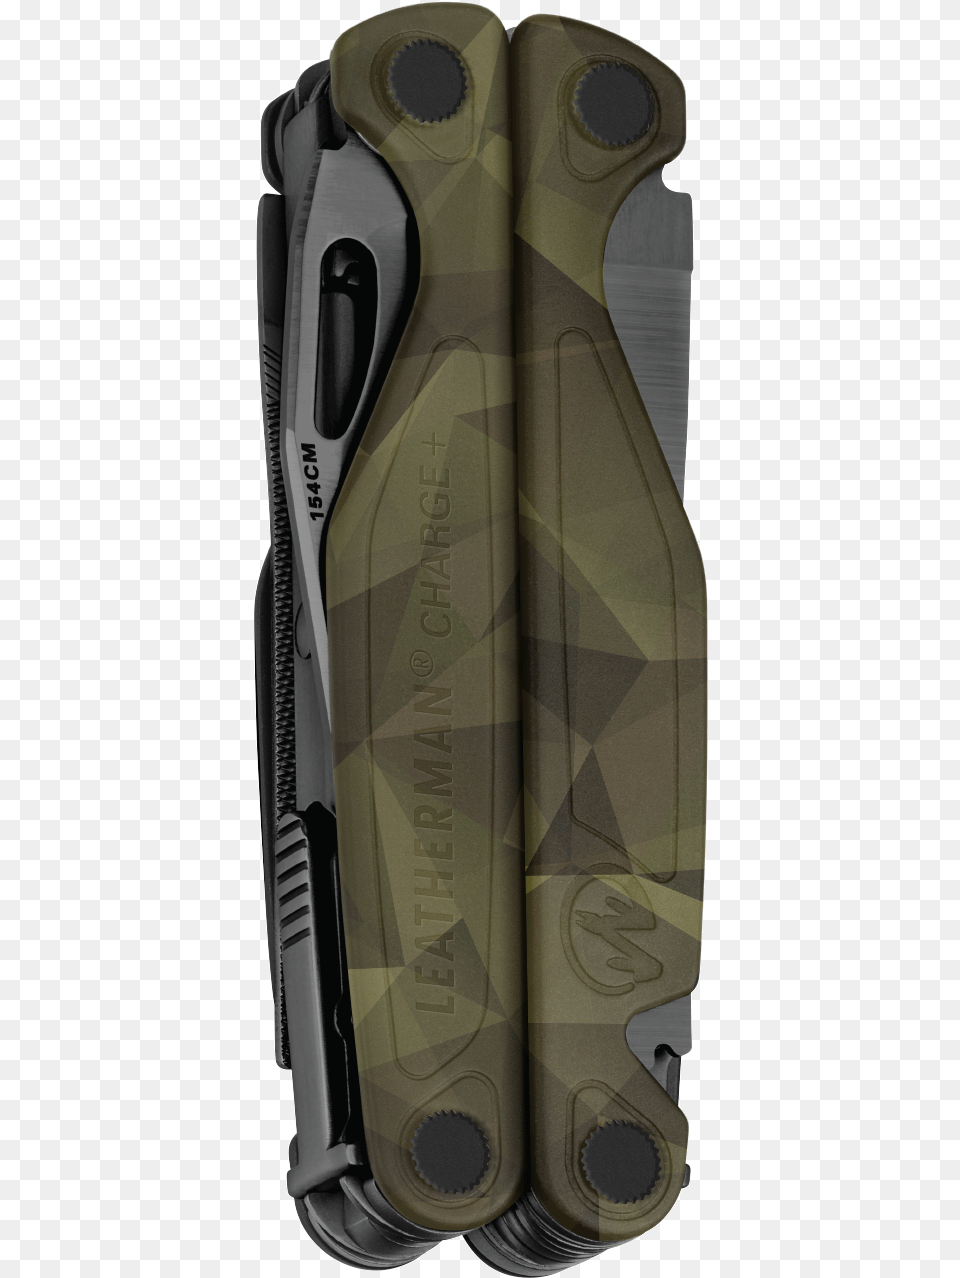 Leatherman Charge Plus Camo, Clothing, Vest, Lifejacket, Armory Free Png Download